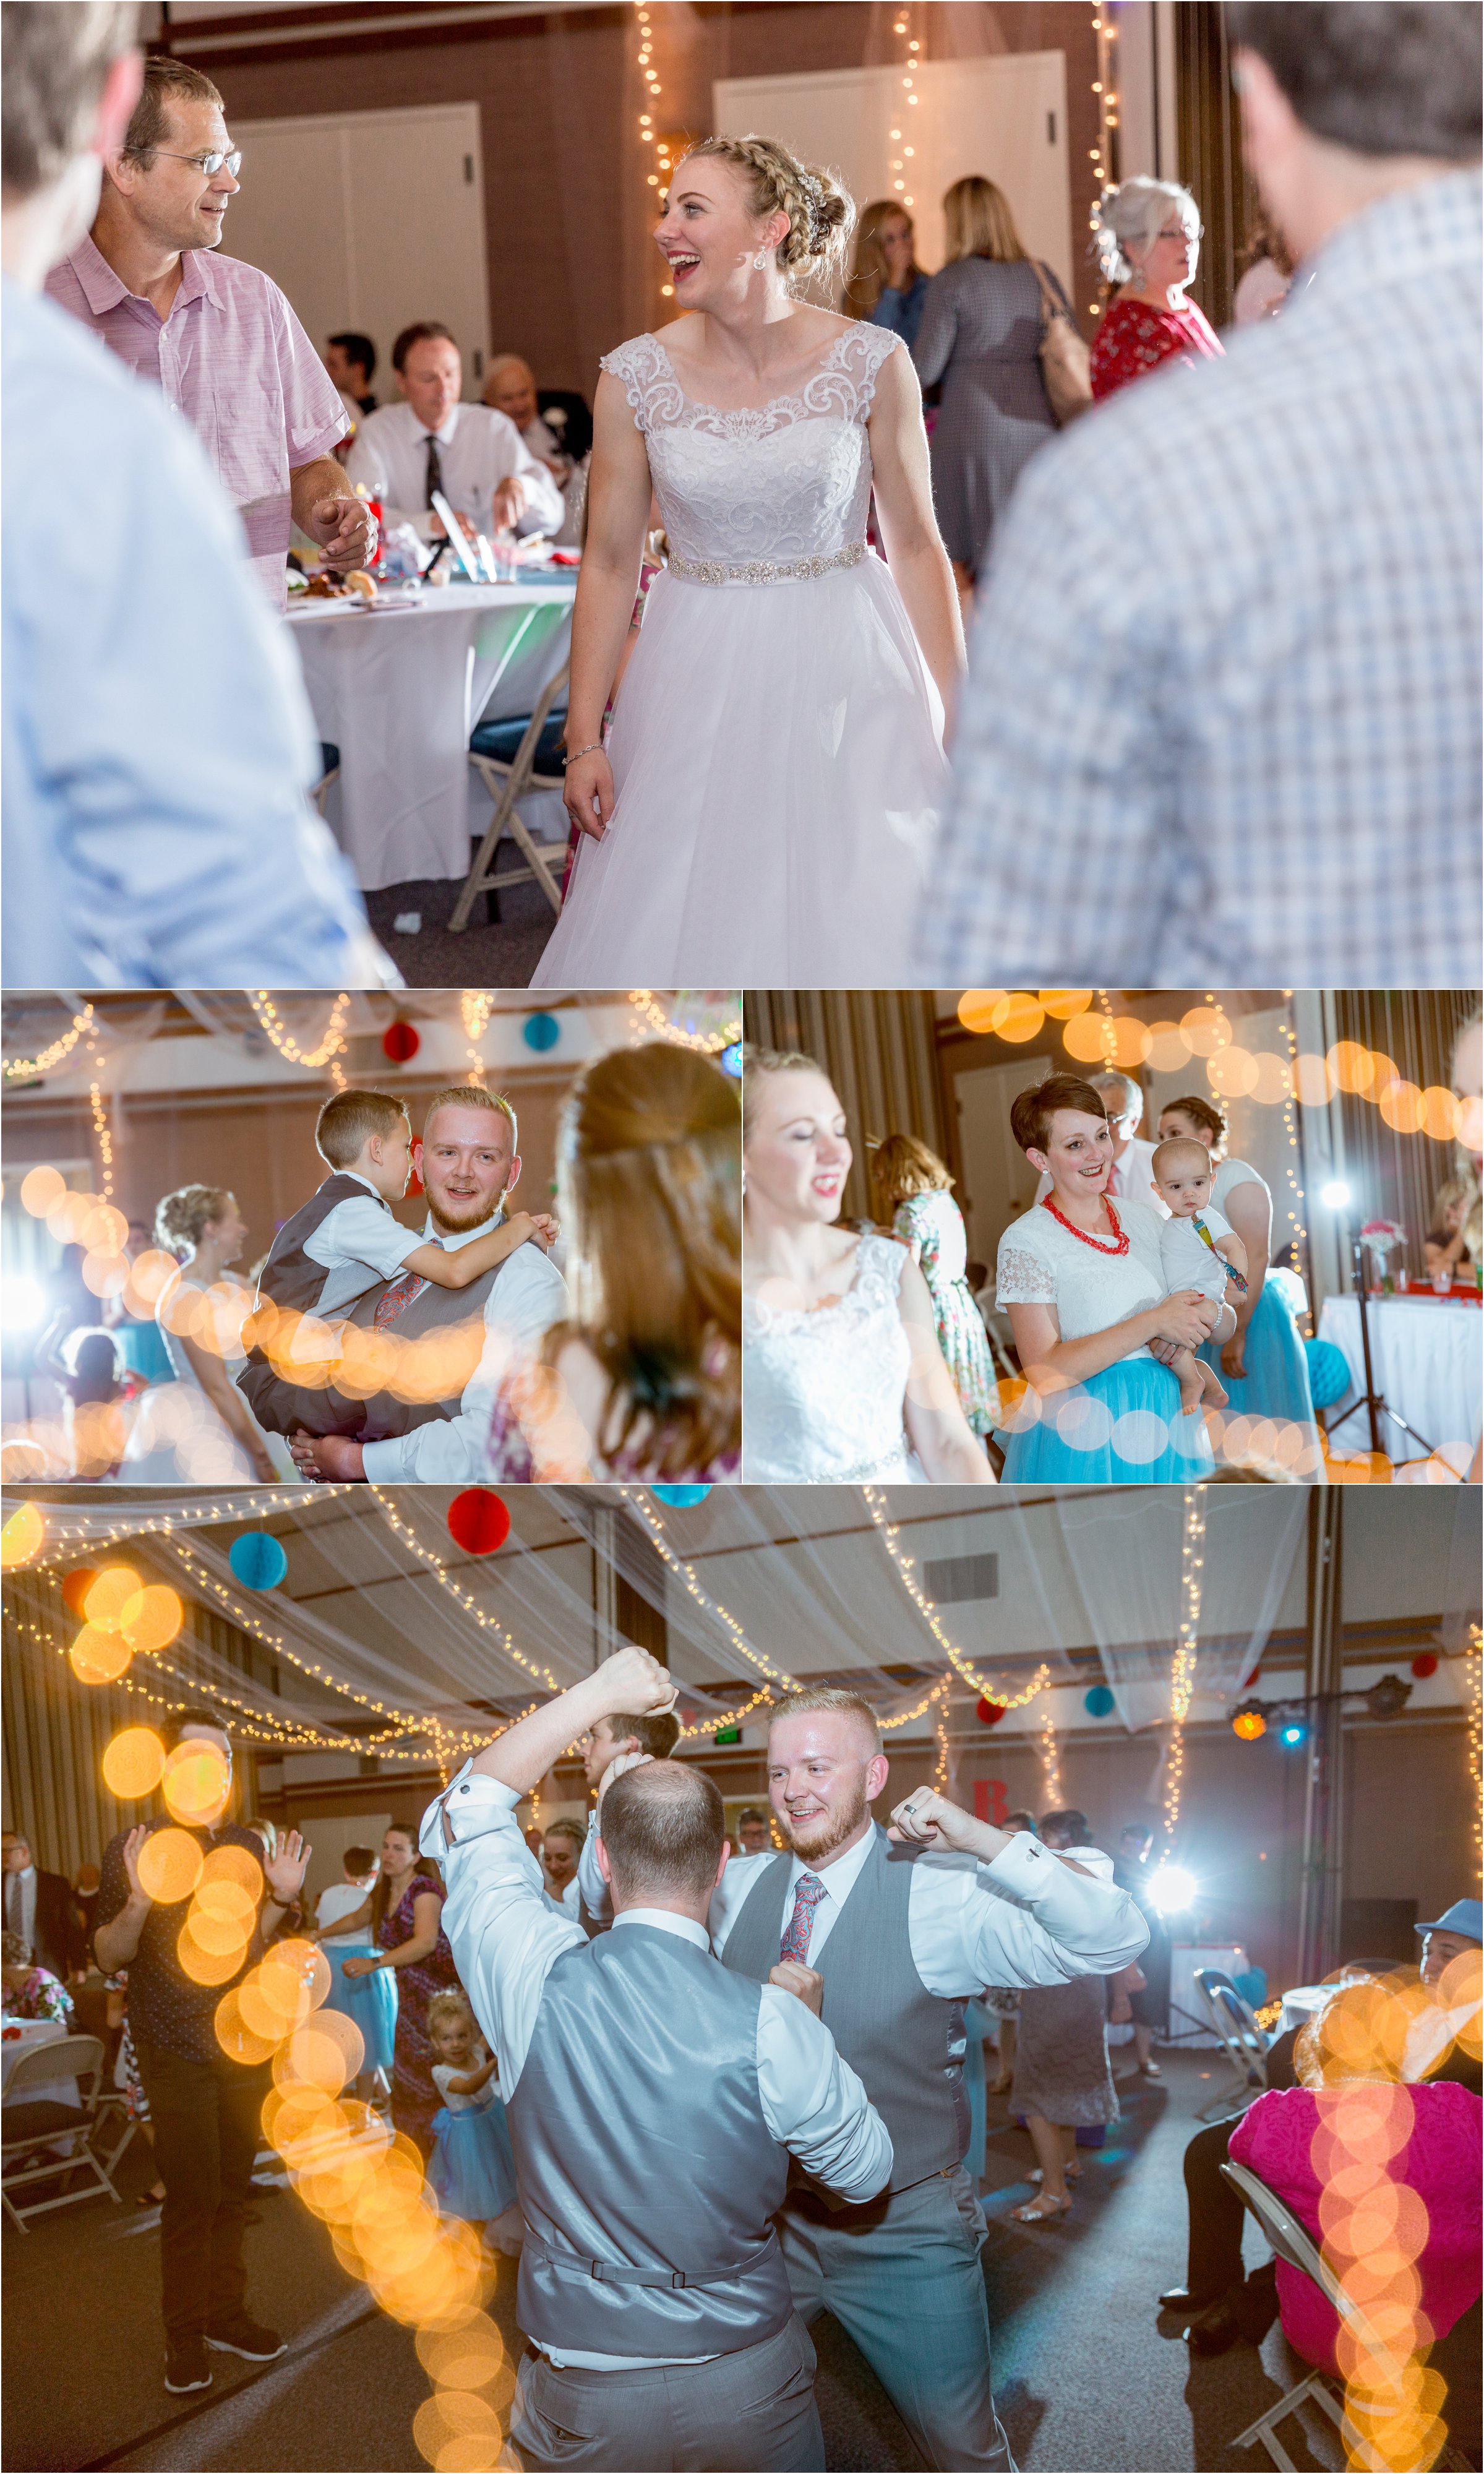 bride and groom dance with guests at their wedding reception